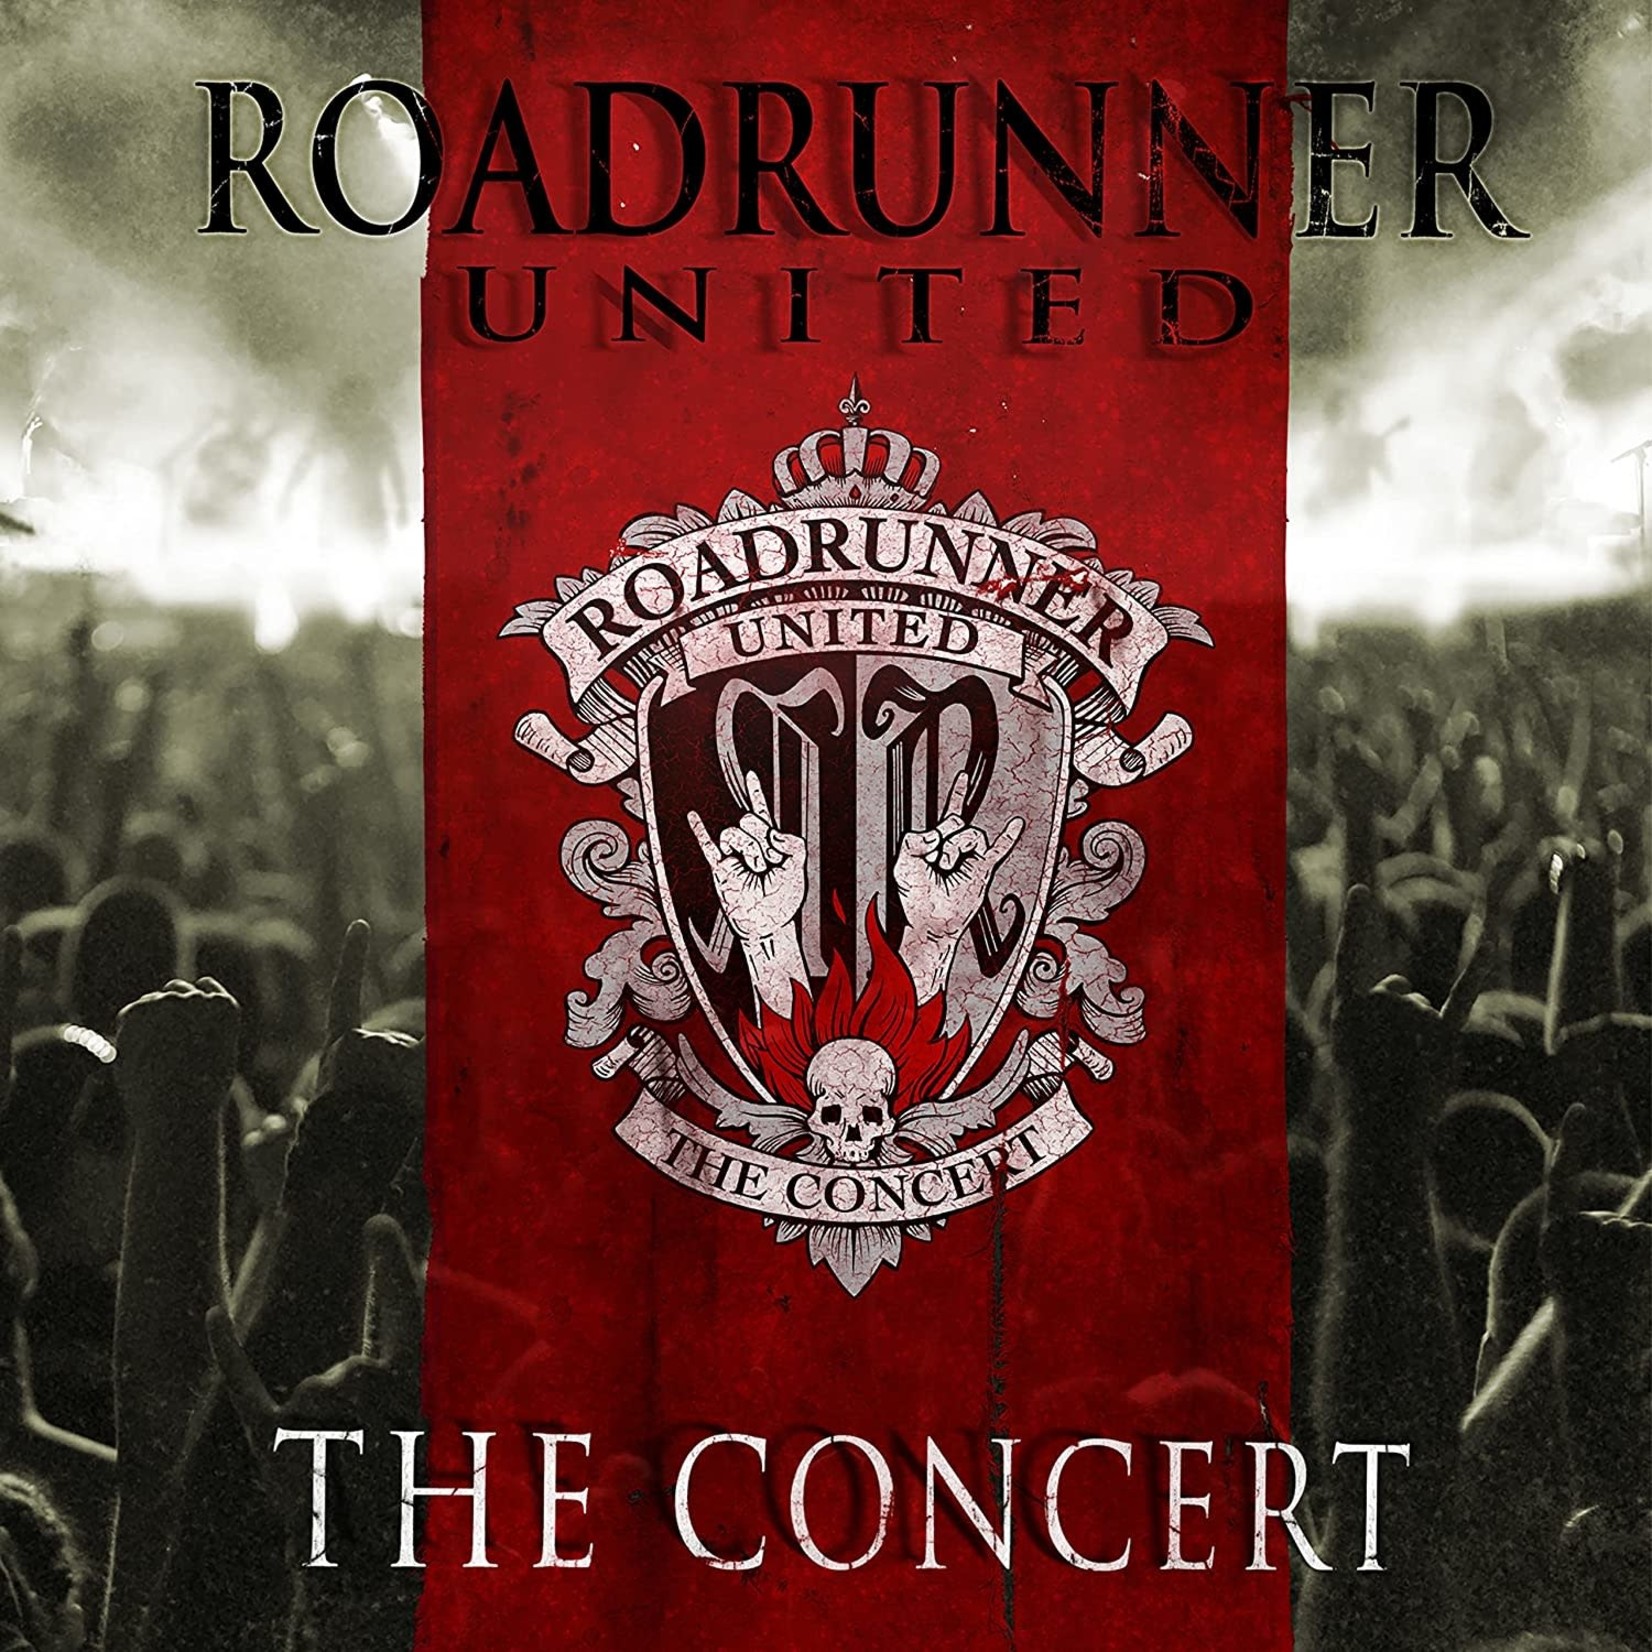 Roadrunner United - The Concert: Live At The Nokia Theatre, New York, NY, 12/15/2005 [2CD]